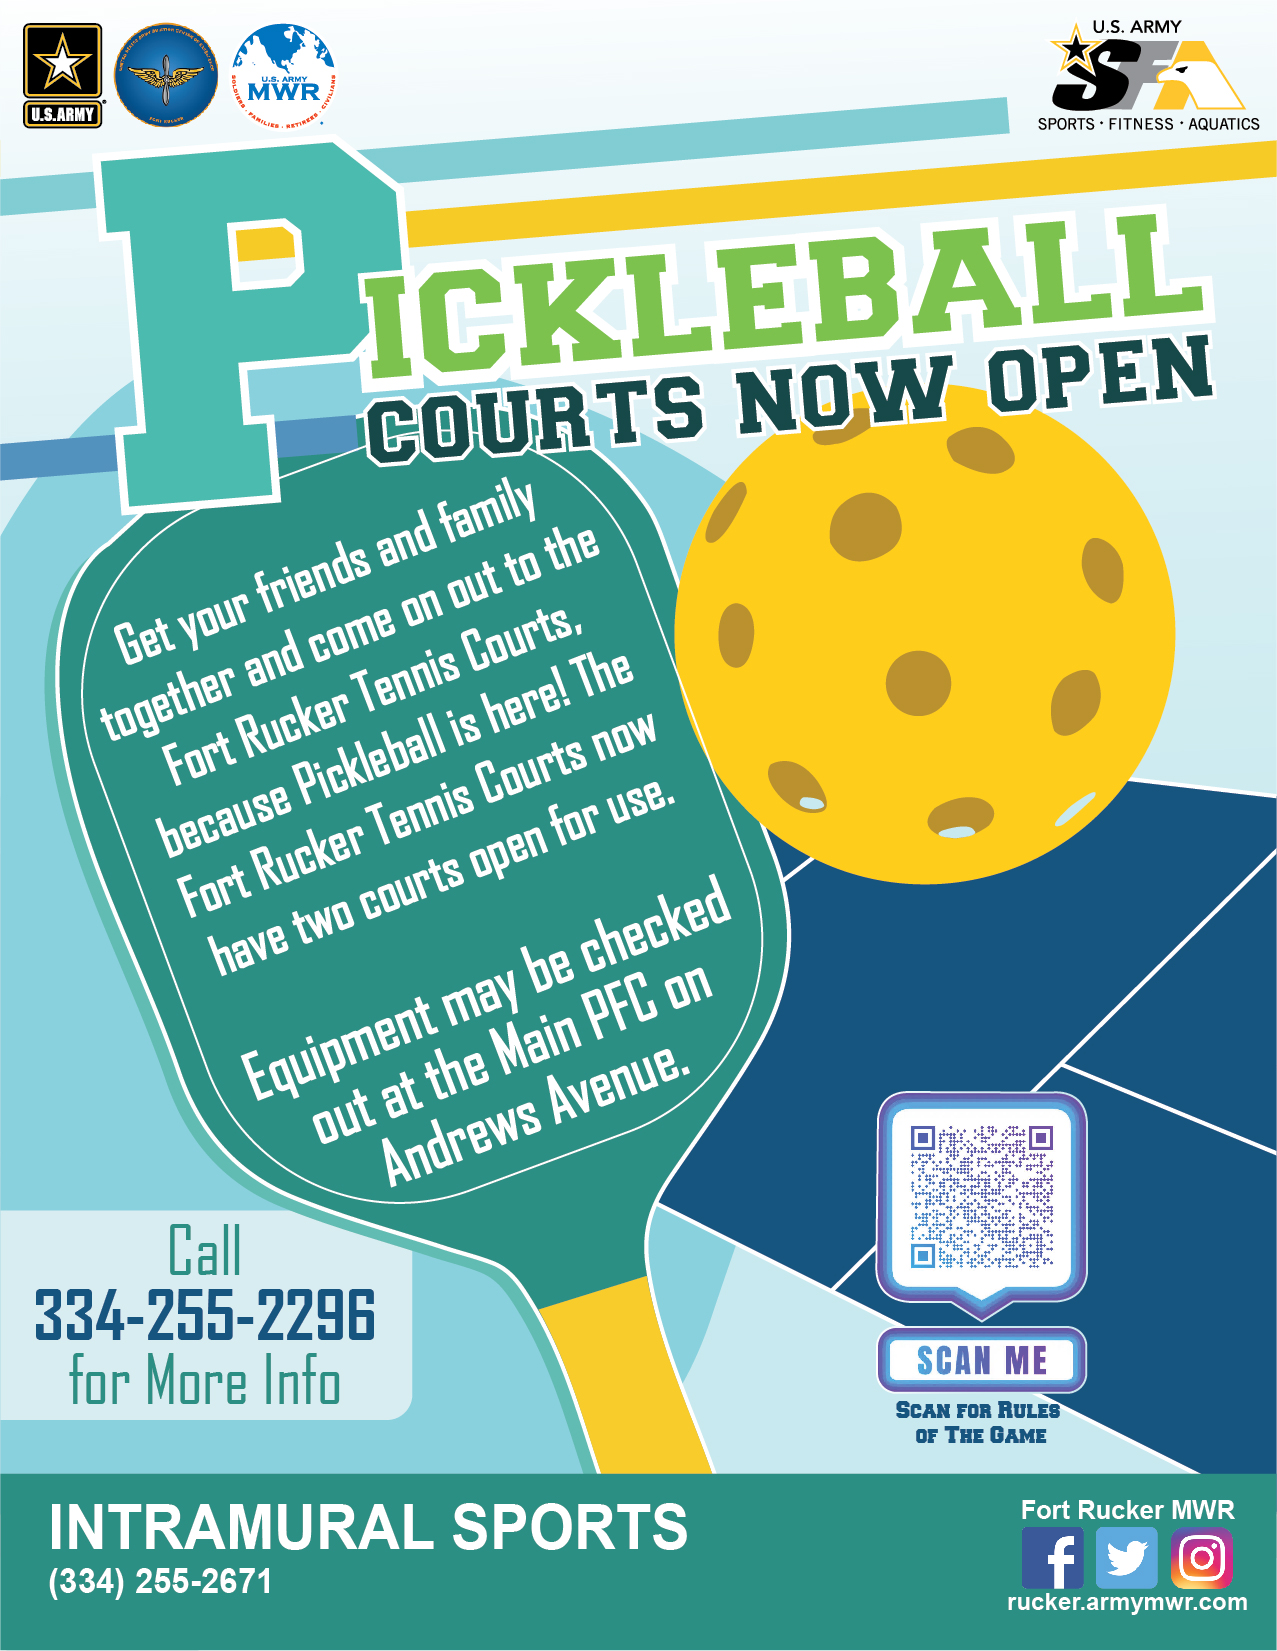 Pickleball :: Ft. Rucker :: US Army MWR